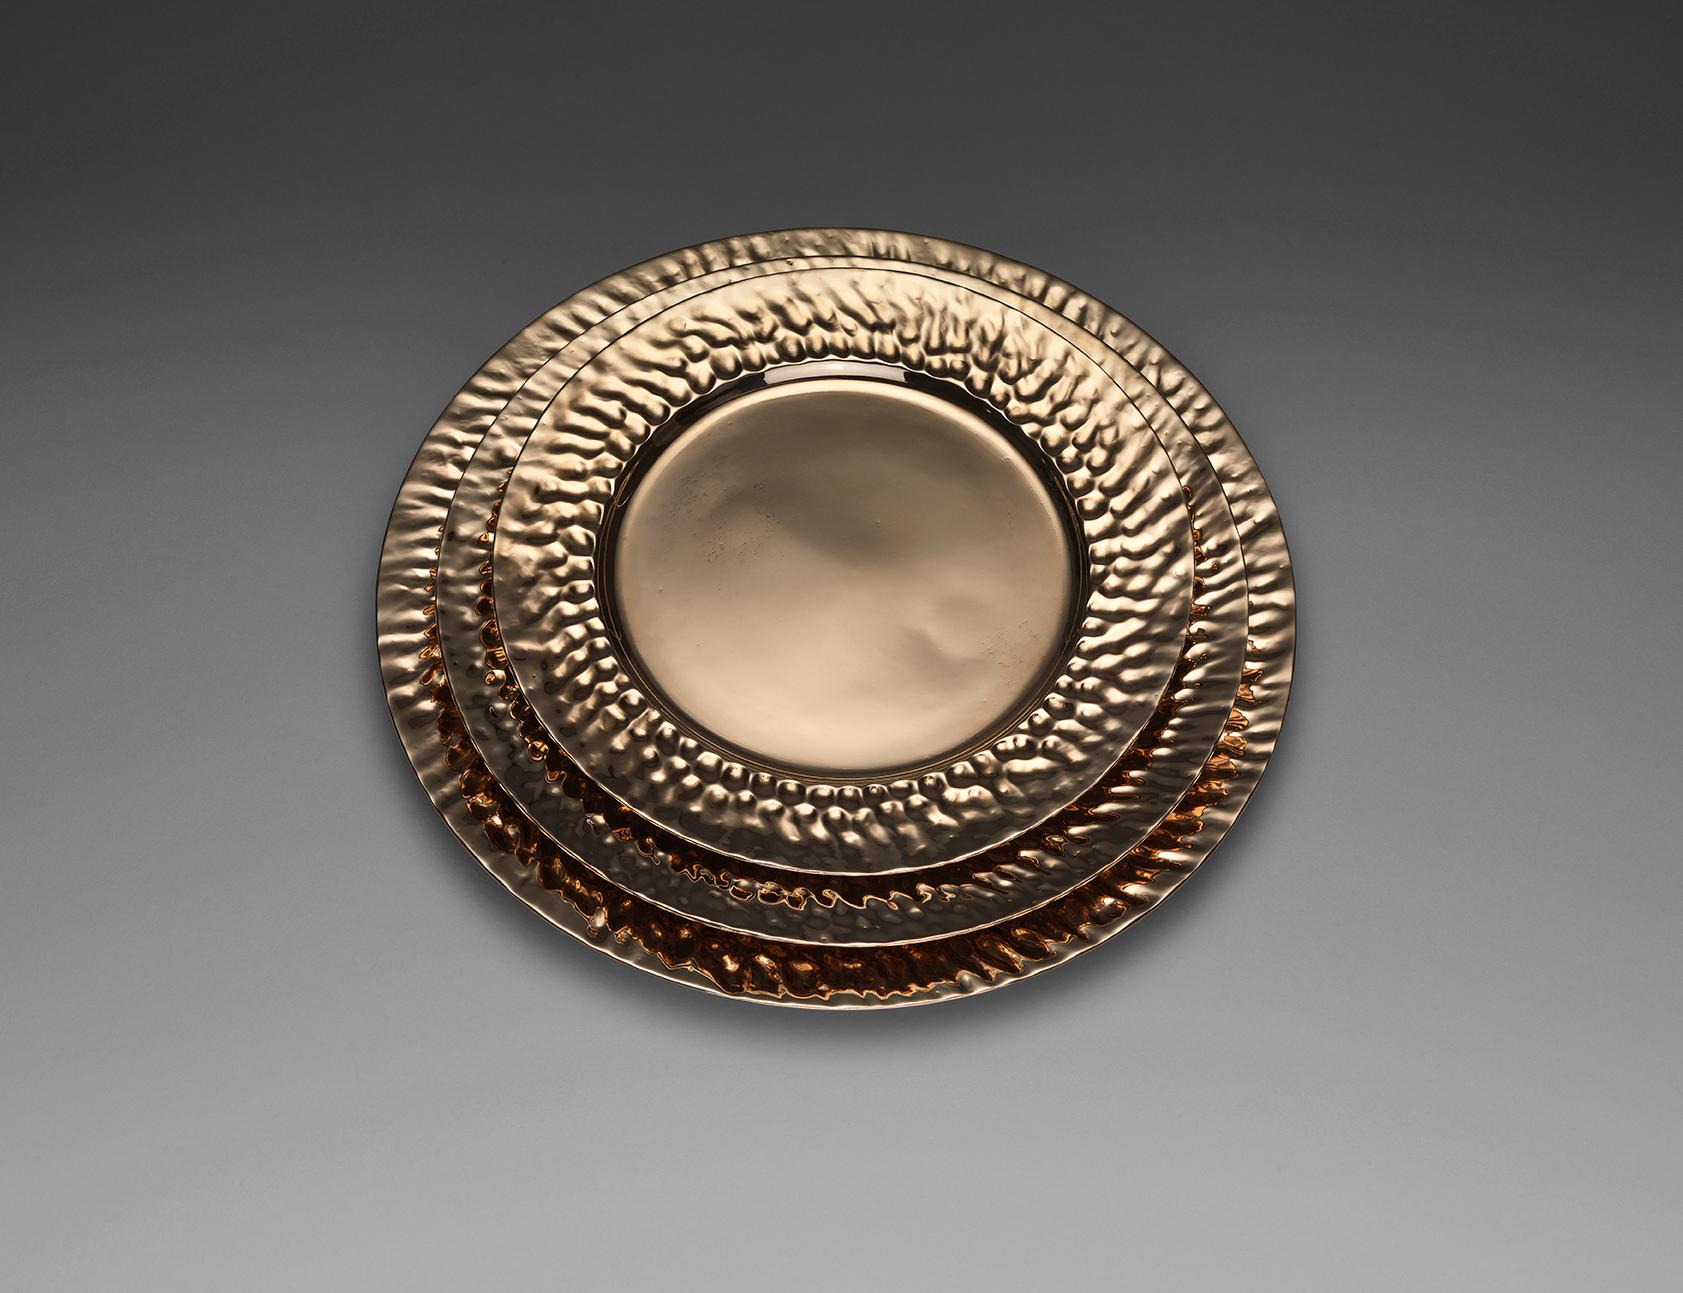 A bronze dessert plate with sculptural lip. Cast by lost wax technique. The plate can be used functionally or decoratively. Great care has been taken with the weight and thickness. They are as thin as porcelain and the weight is satisfying but not